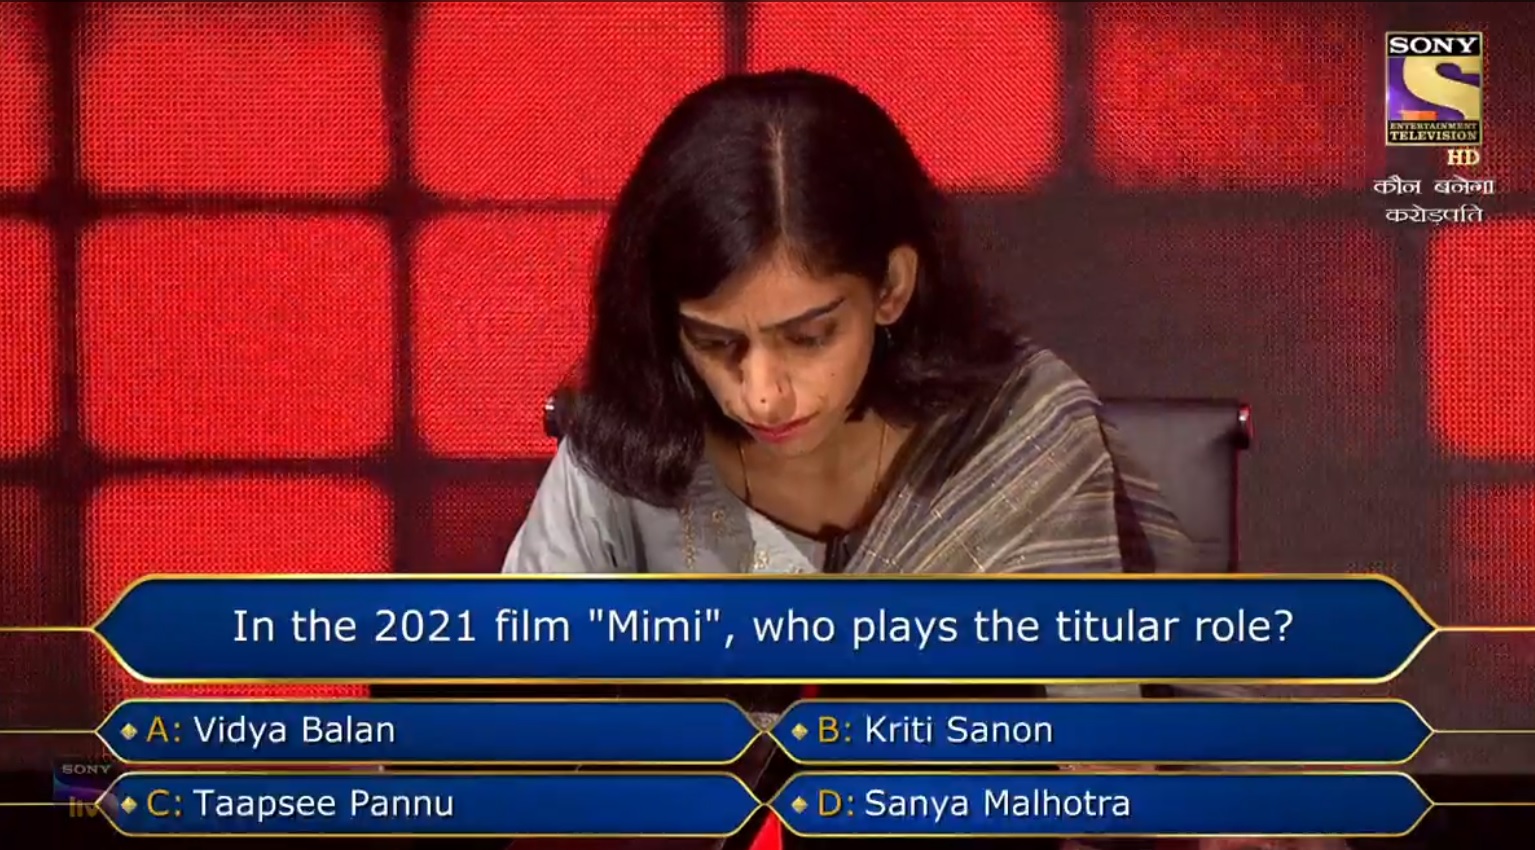 Ques : In the 2021 film “Mimi”, who plays the titular role?